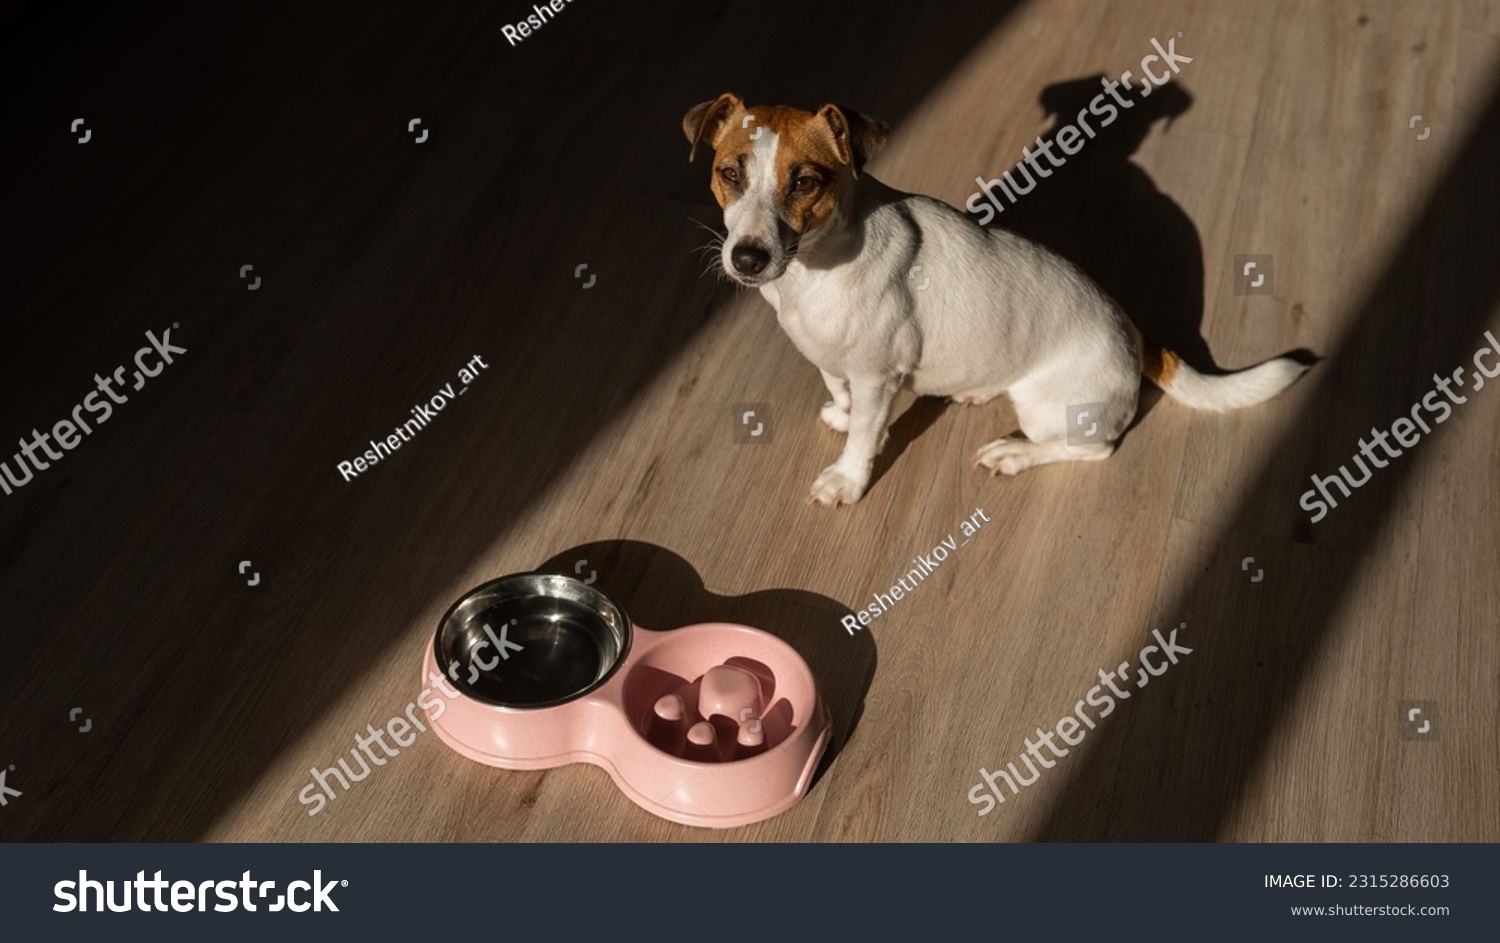 A double bowl for slow feeding and a bowl of water for the dog. Top view of a jack russell terrier dog near a pink plate with dry food on a wooden floor. #2315286603